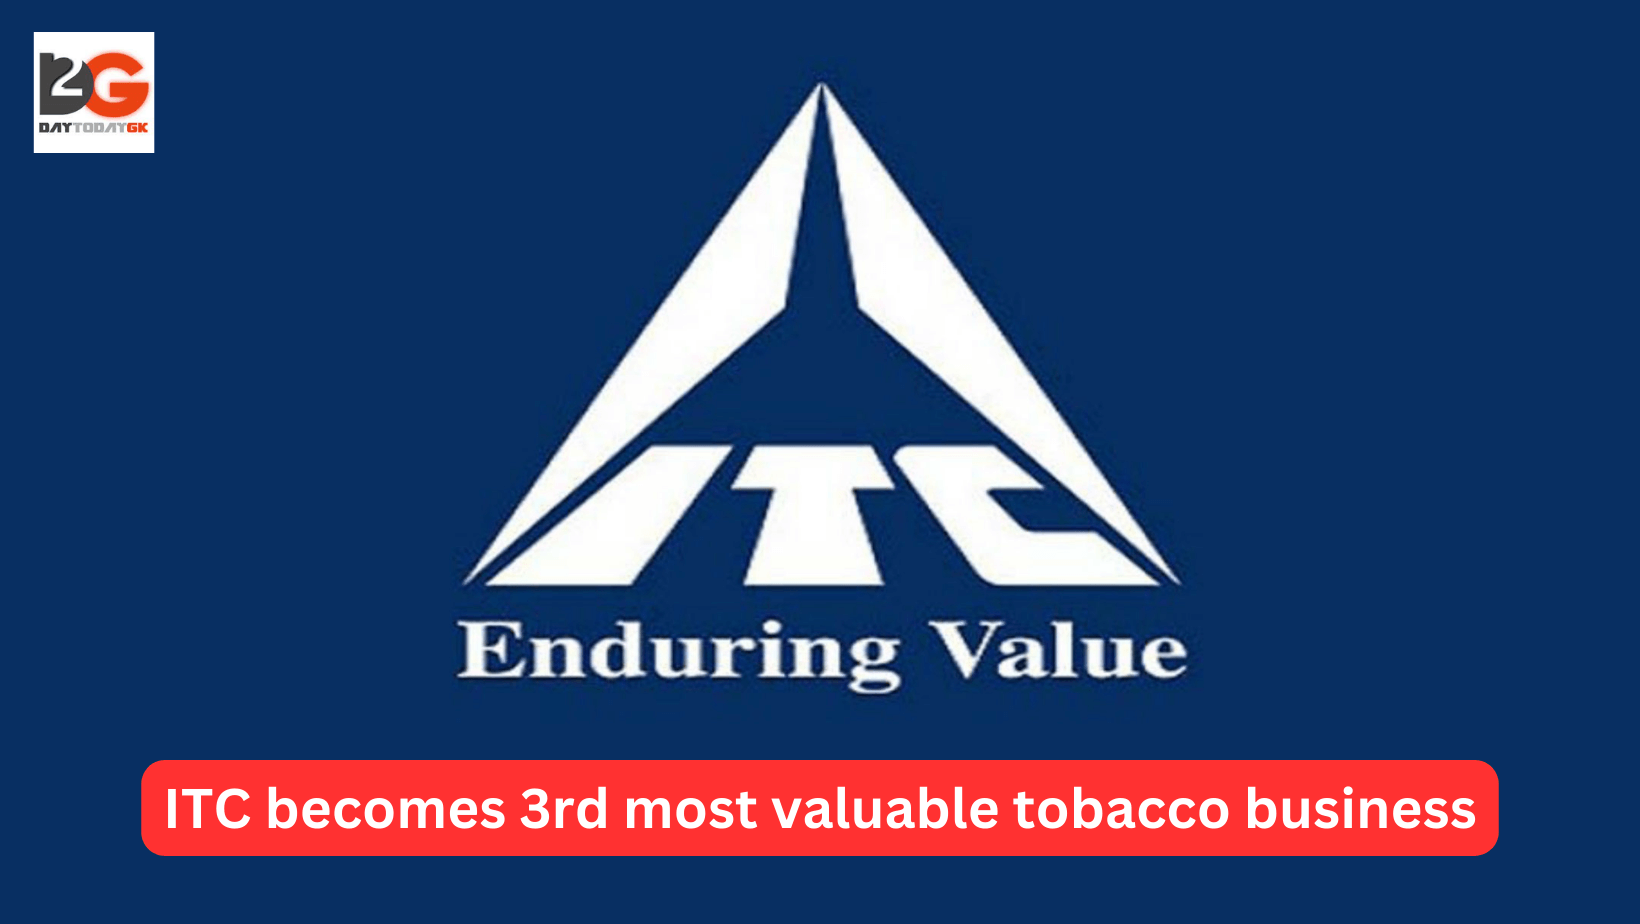 ITC becomes 3rd most valuable tobacco business